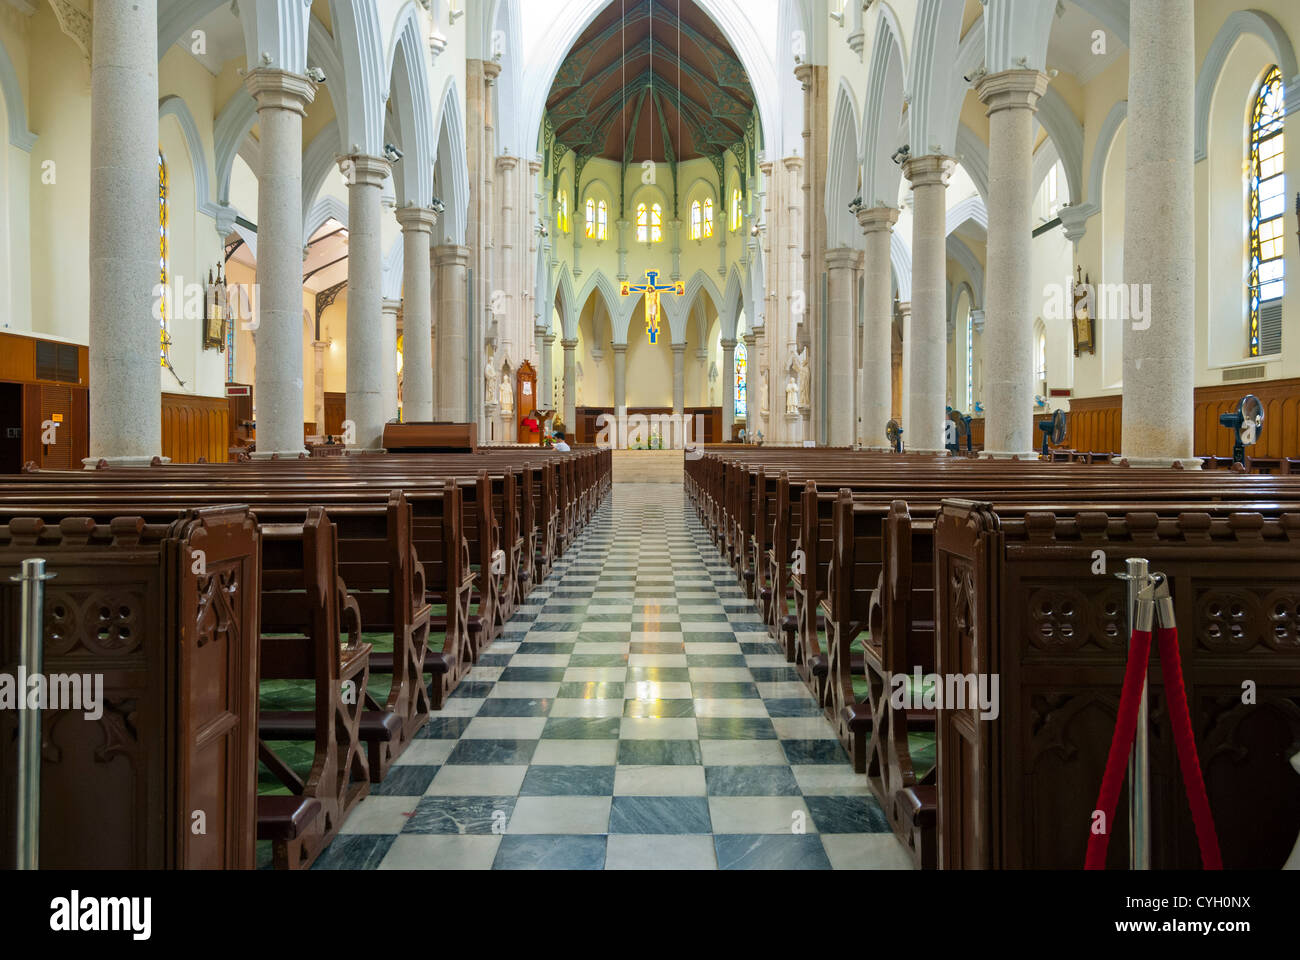 The Catholic Cathedral Of The Immaculate Conception Interior Hong